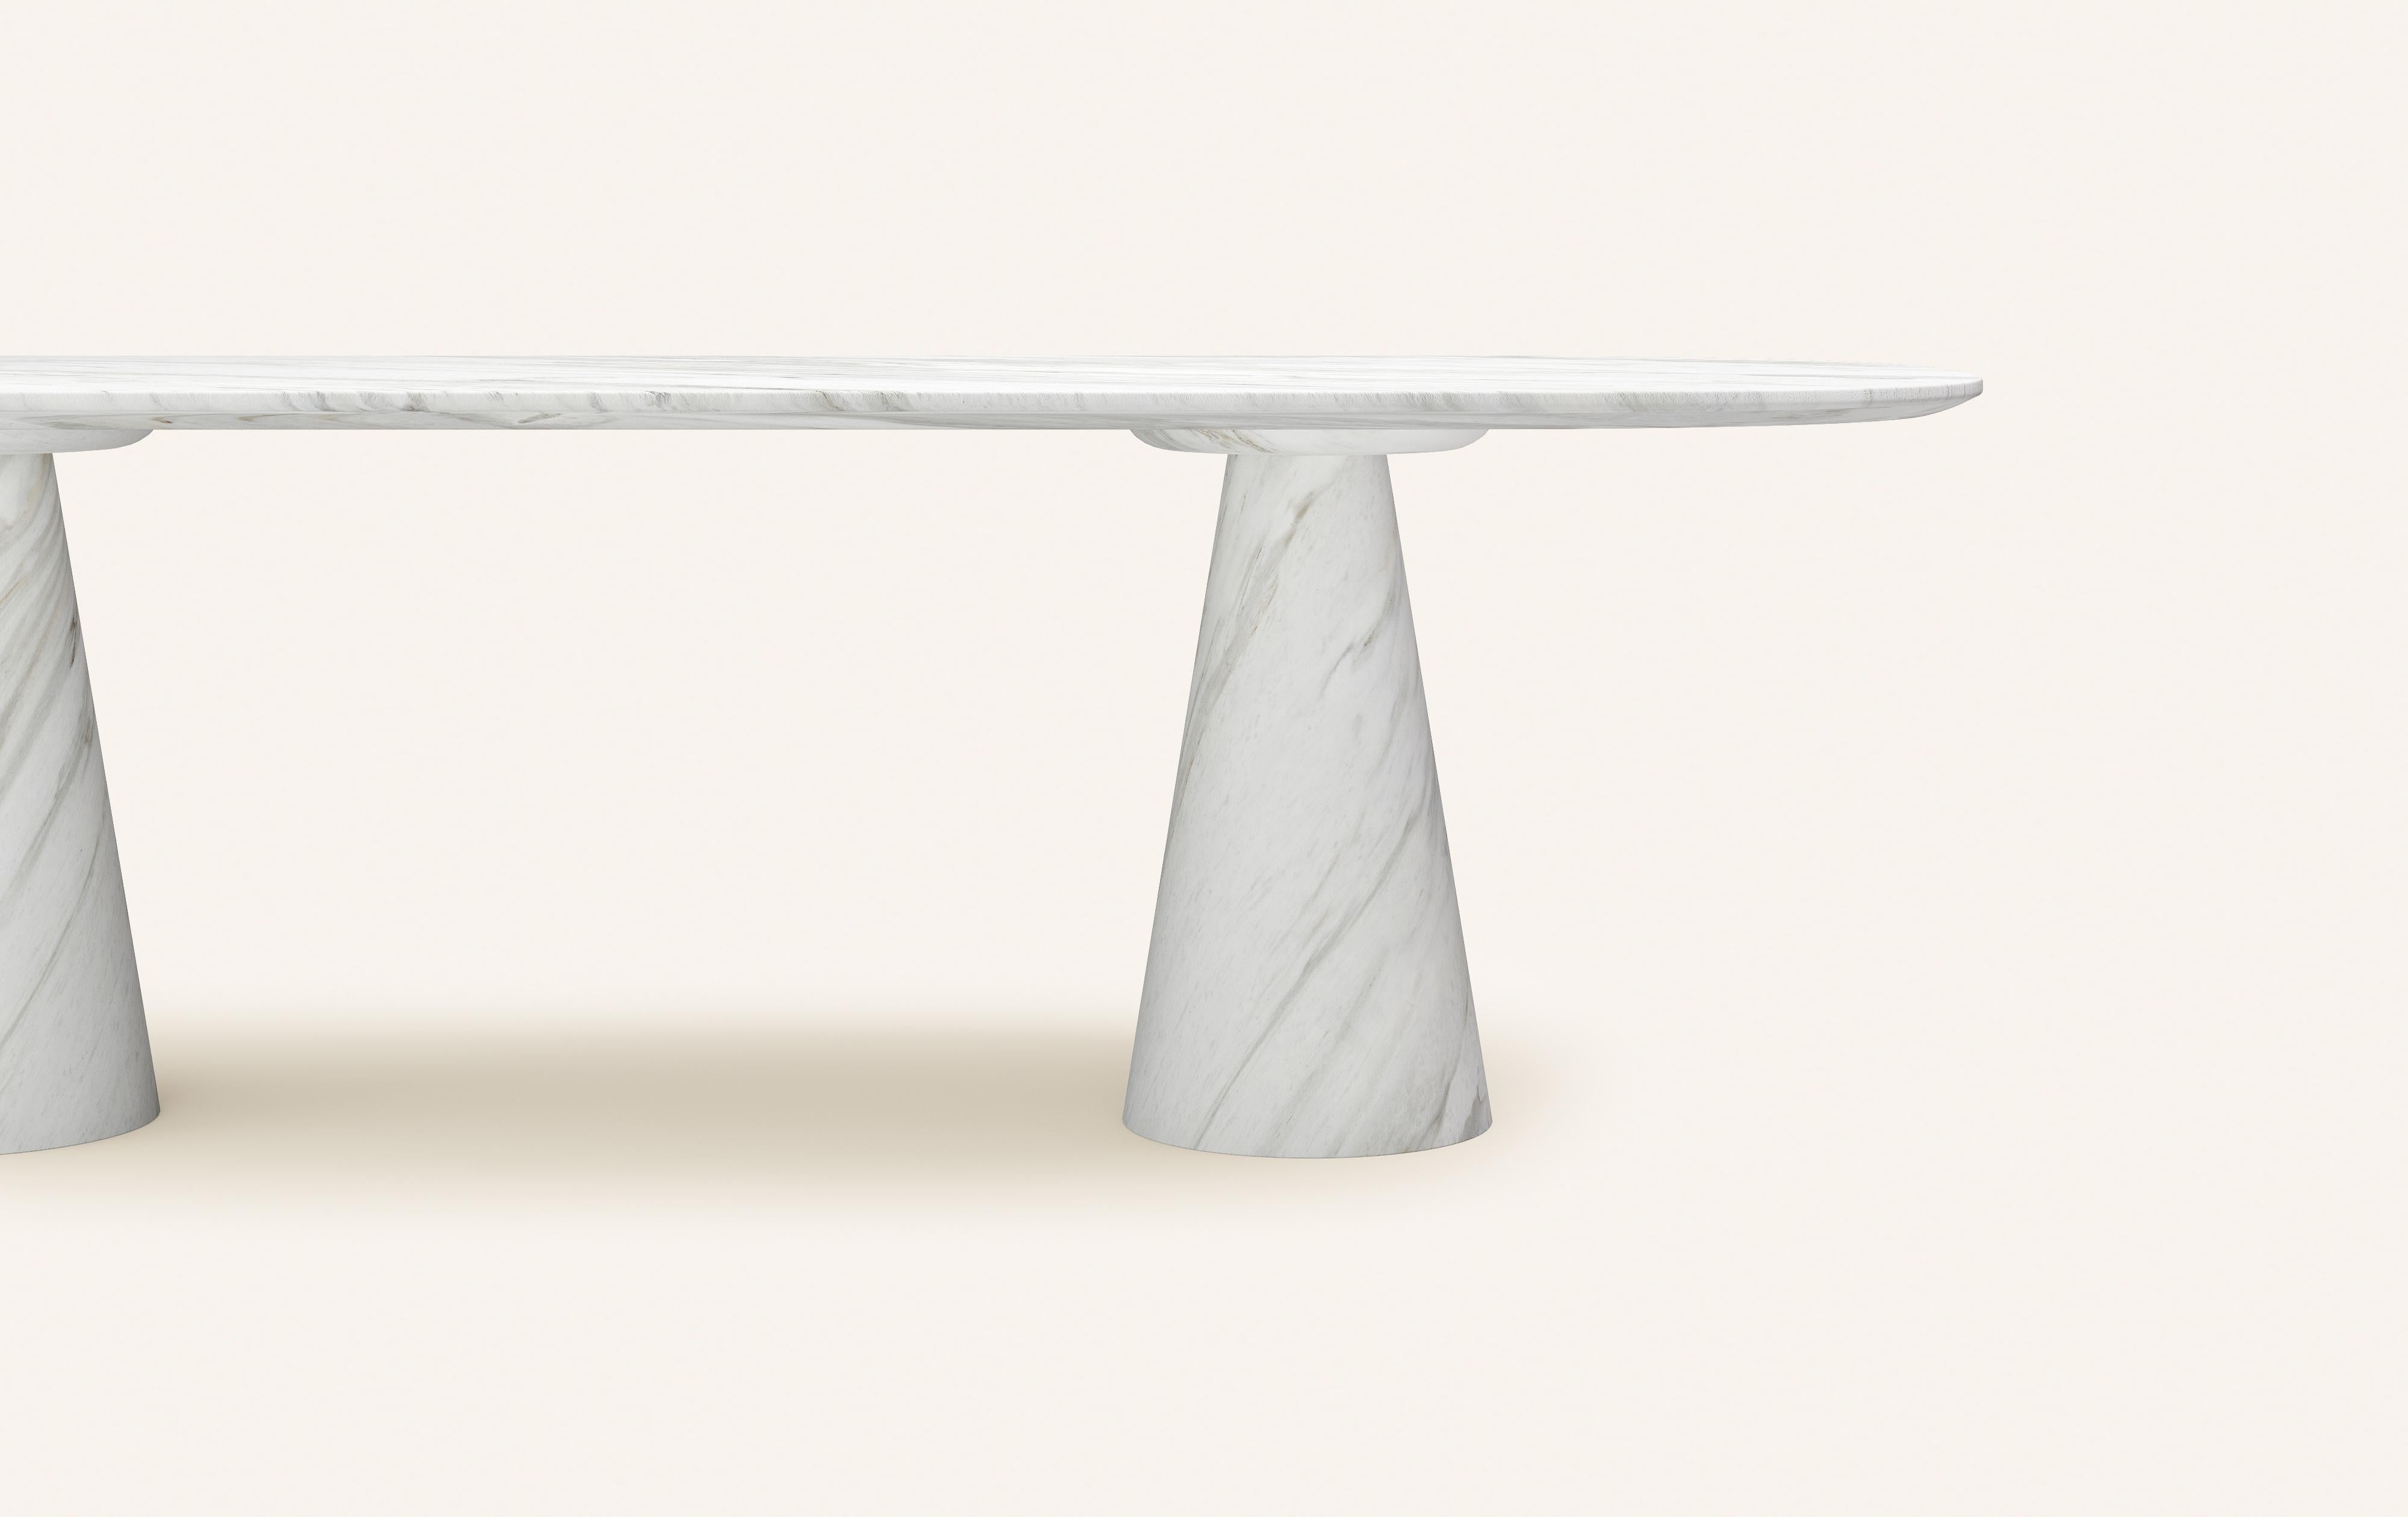 American FORM(LA) Cono Oval Dining Table 96”L x 42”W x 30”H Volakas White Marble For Sale